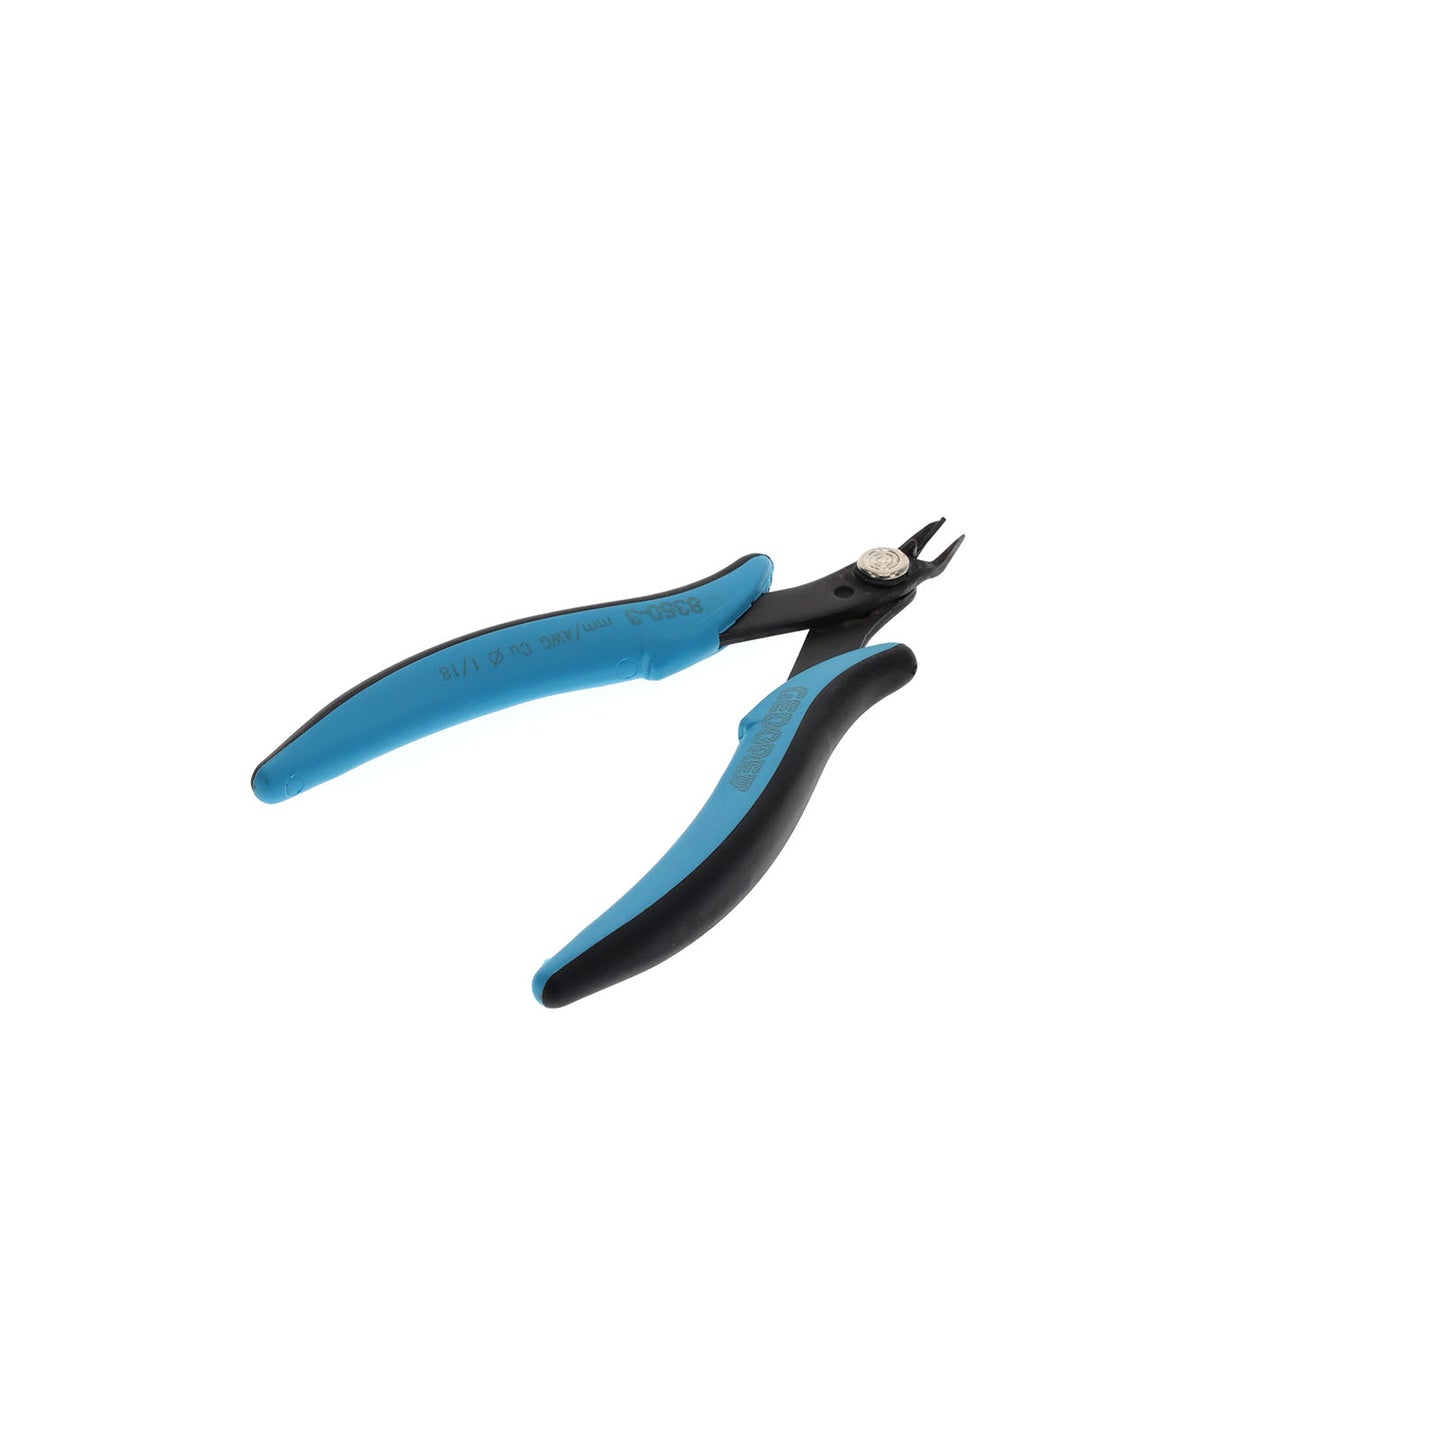 GEDORE 8350-3 - Electronic Cutting Pliers (1828975)